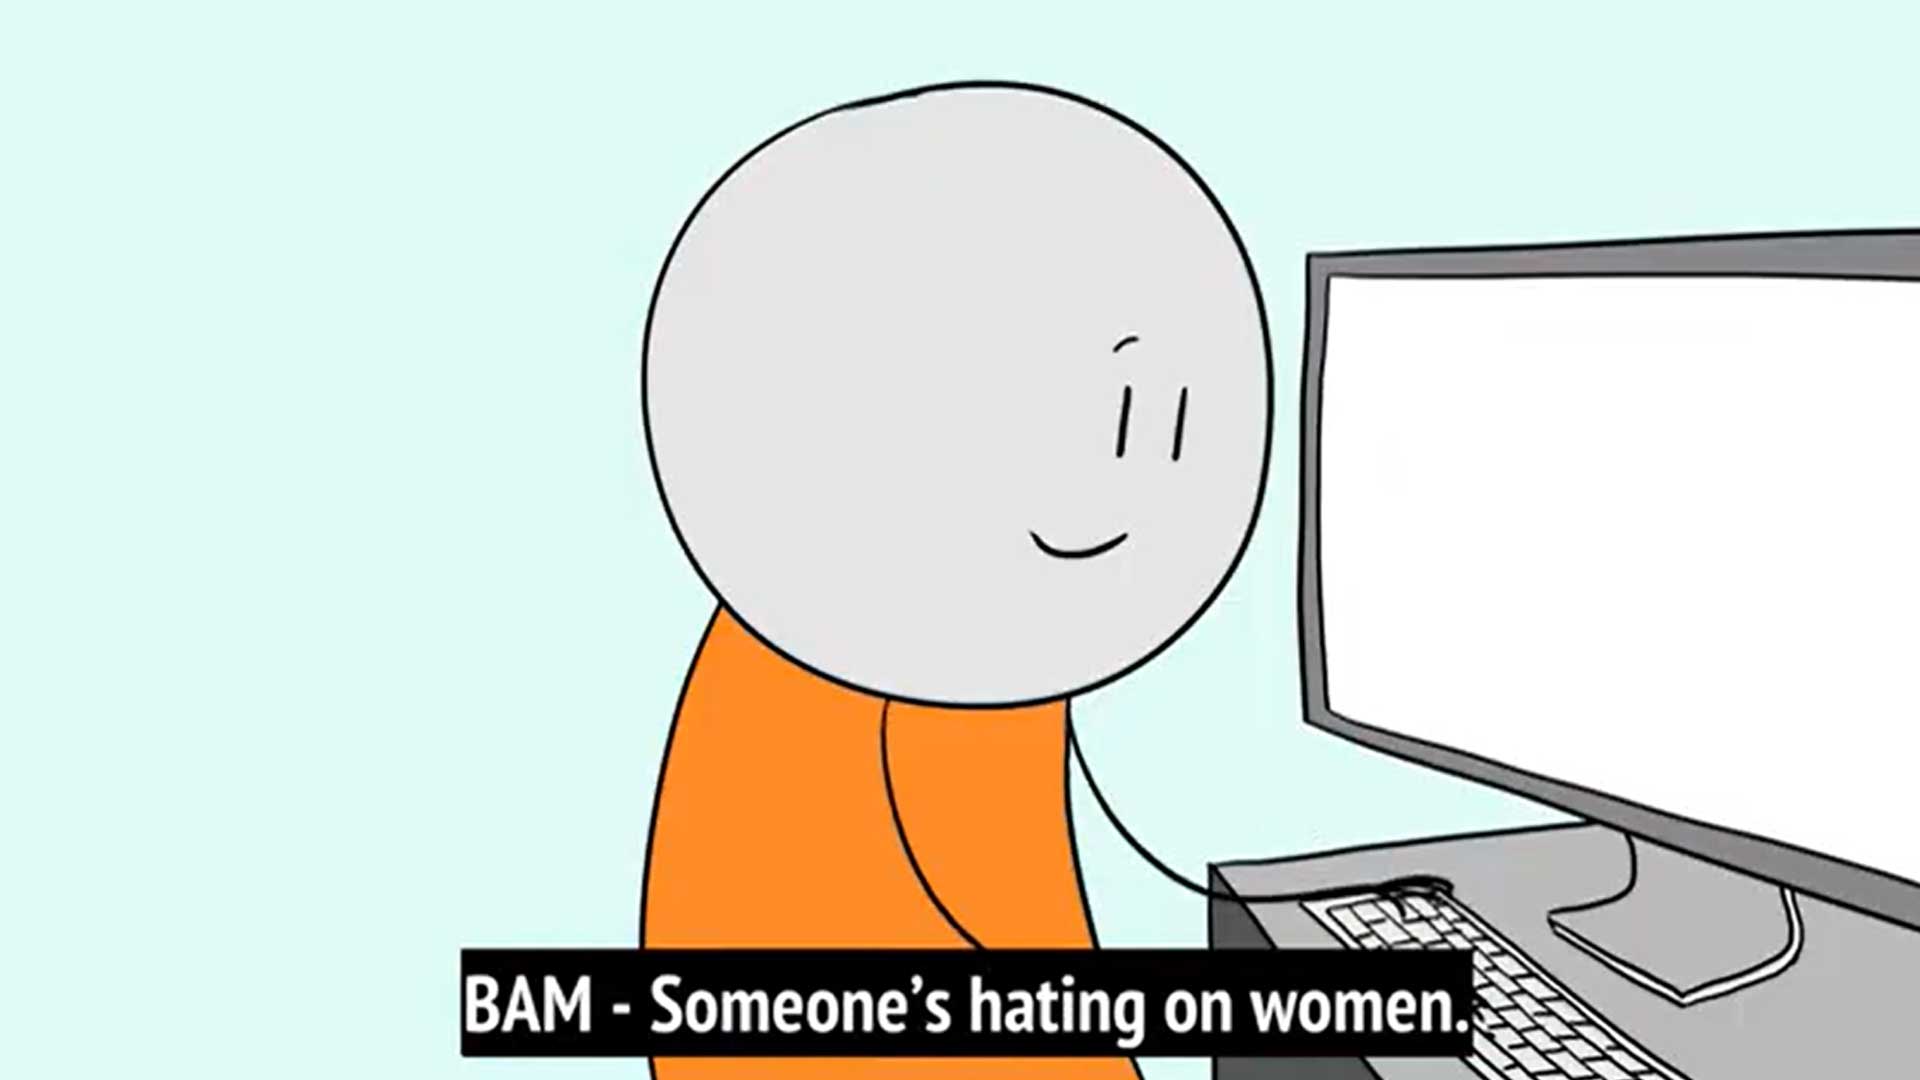 Simple cartoon of a person at a computer. Text at the bottom will read: BAM - someone's hating on women.